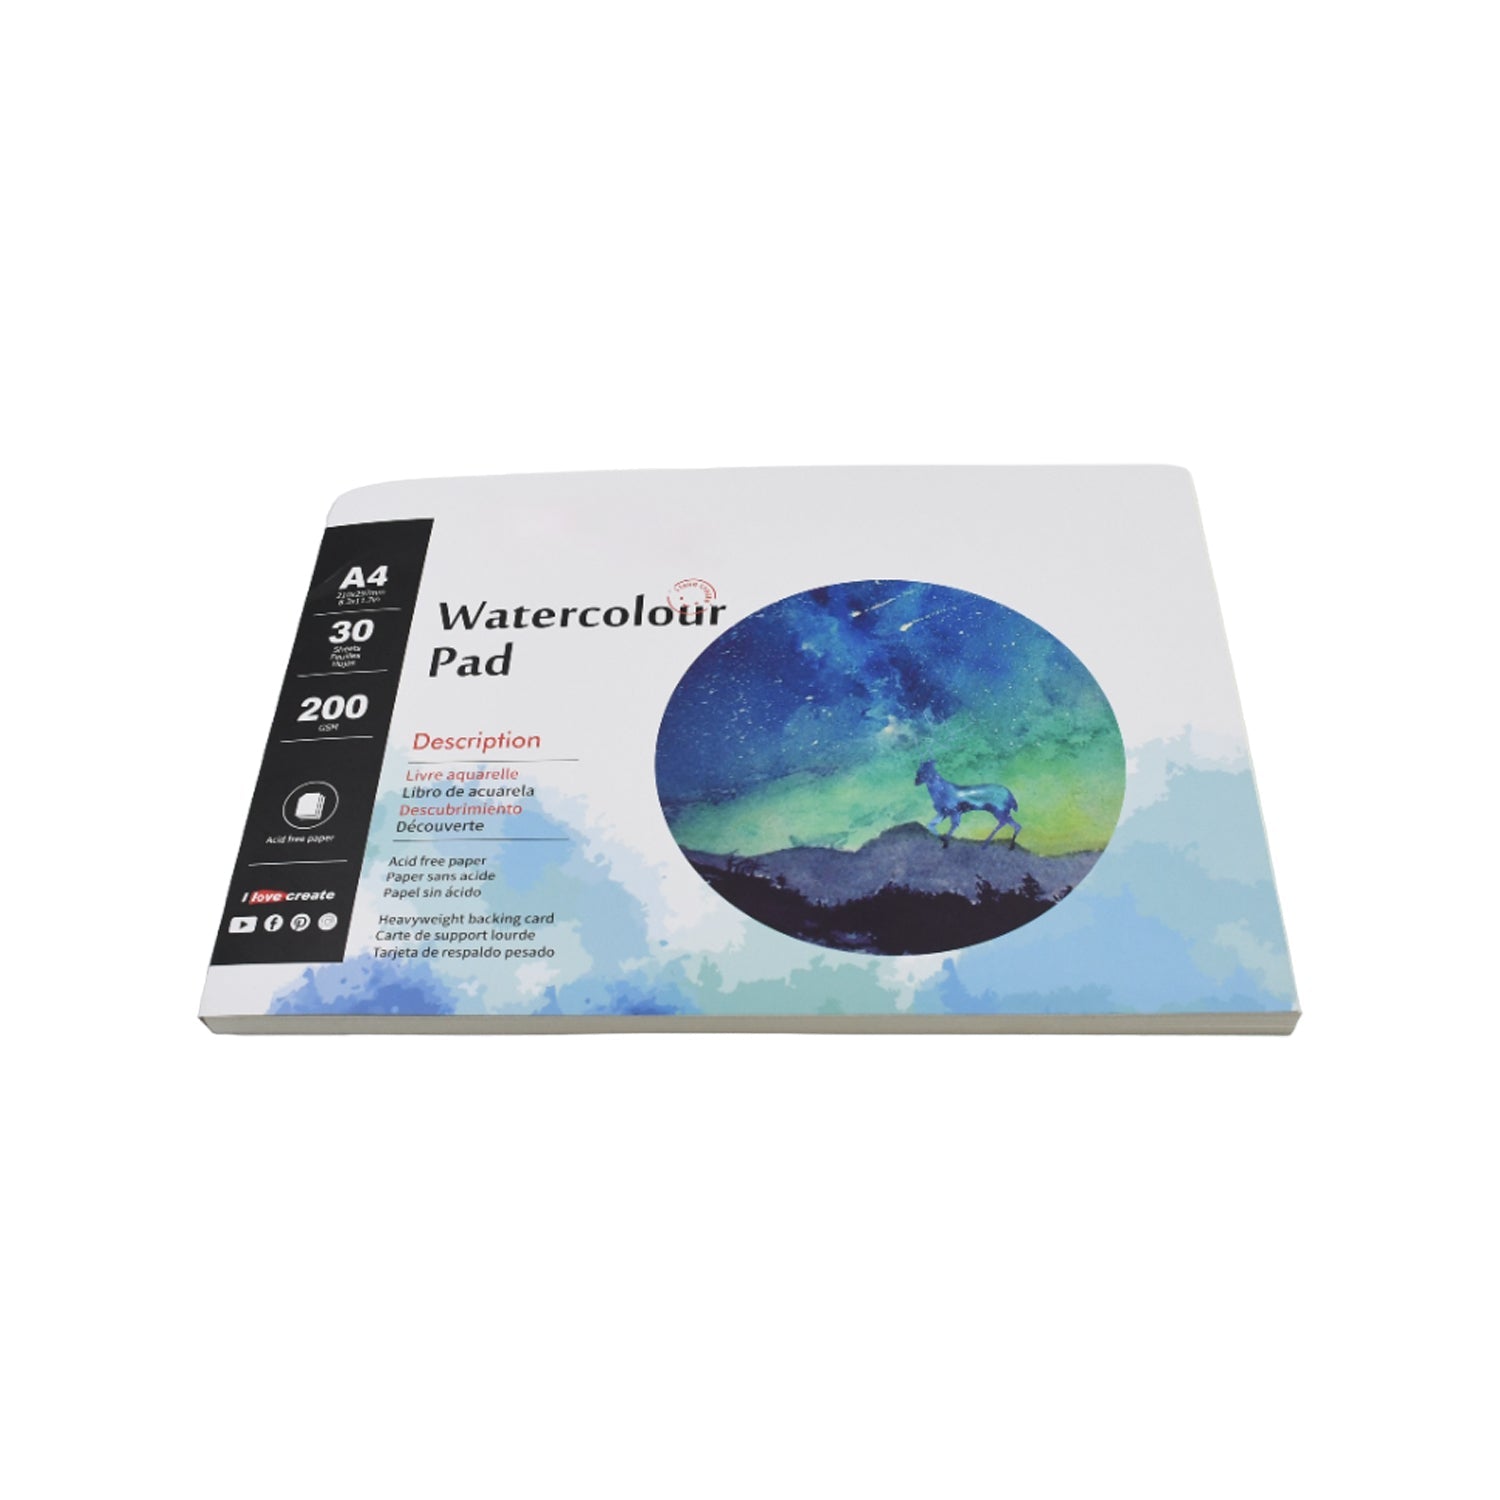 4388 Watercolor Paper Pad,1 Pack,200gsm,A4 8.3"x11.7",60 Sheets Total, Acid Free for Wet Media Painting Paper Pads, for Illustration, Painting, Drawing and Sketching 210x297mm (1 Pc)